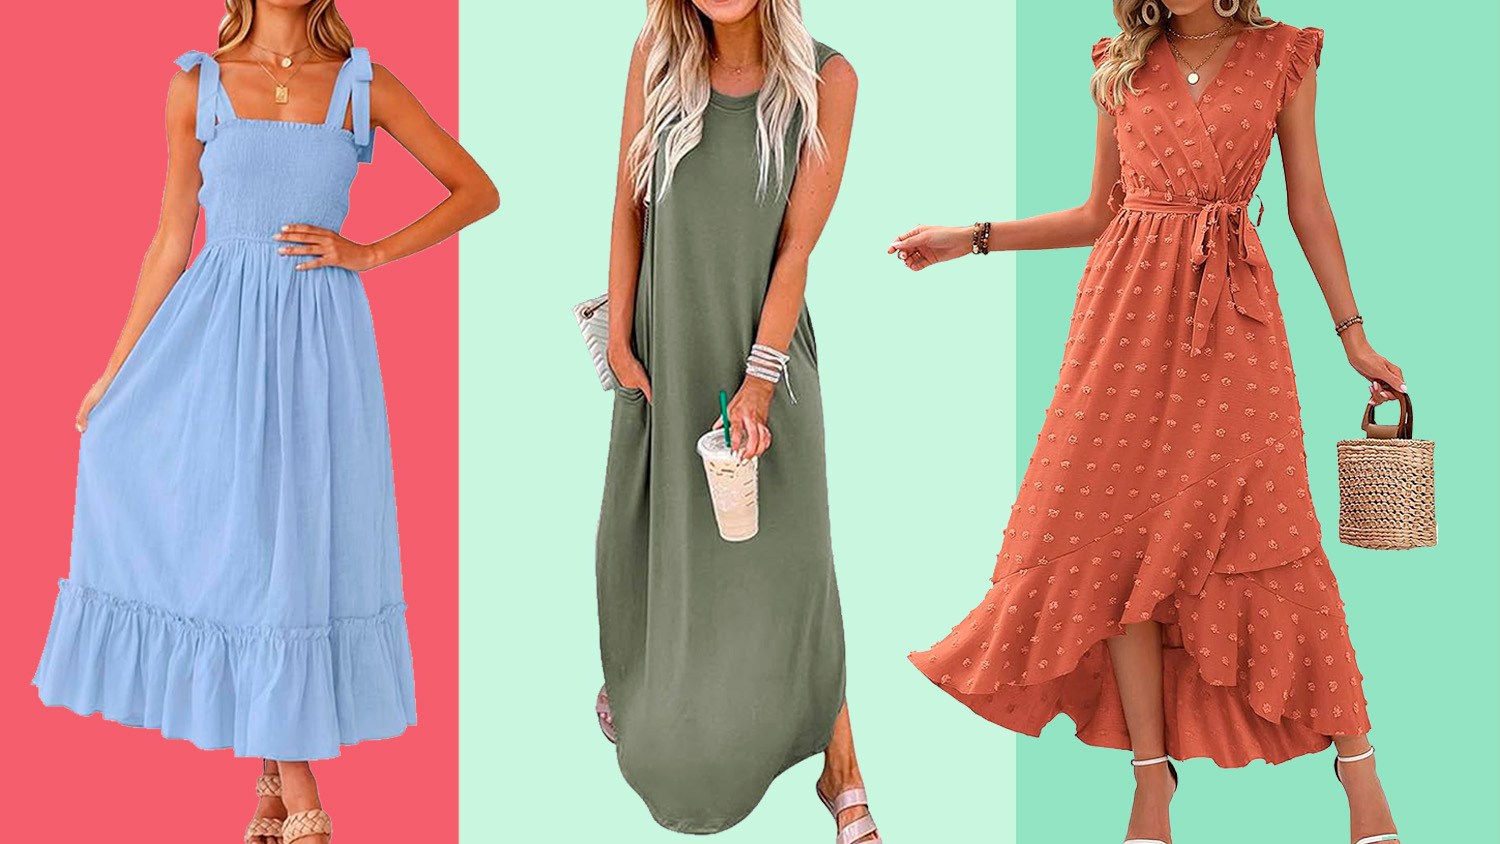 Amazon's spring fashion finds start at $6